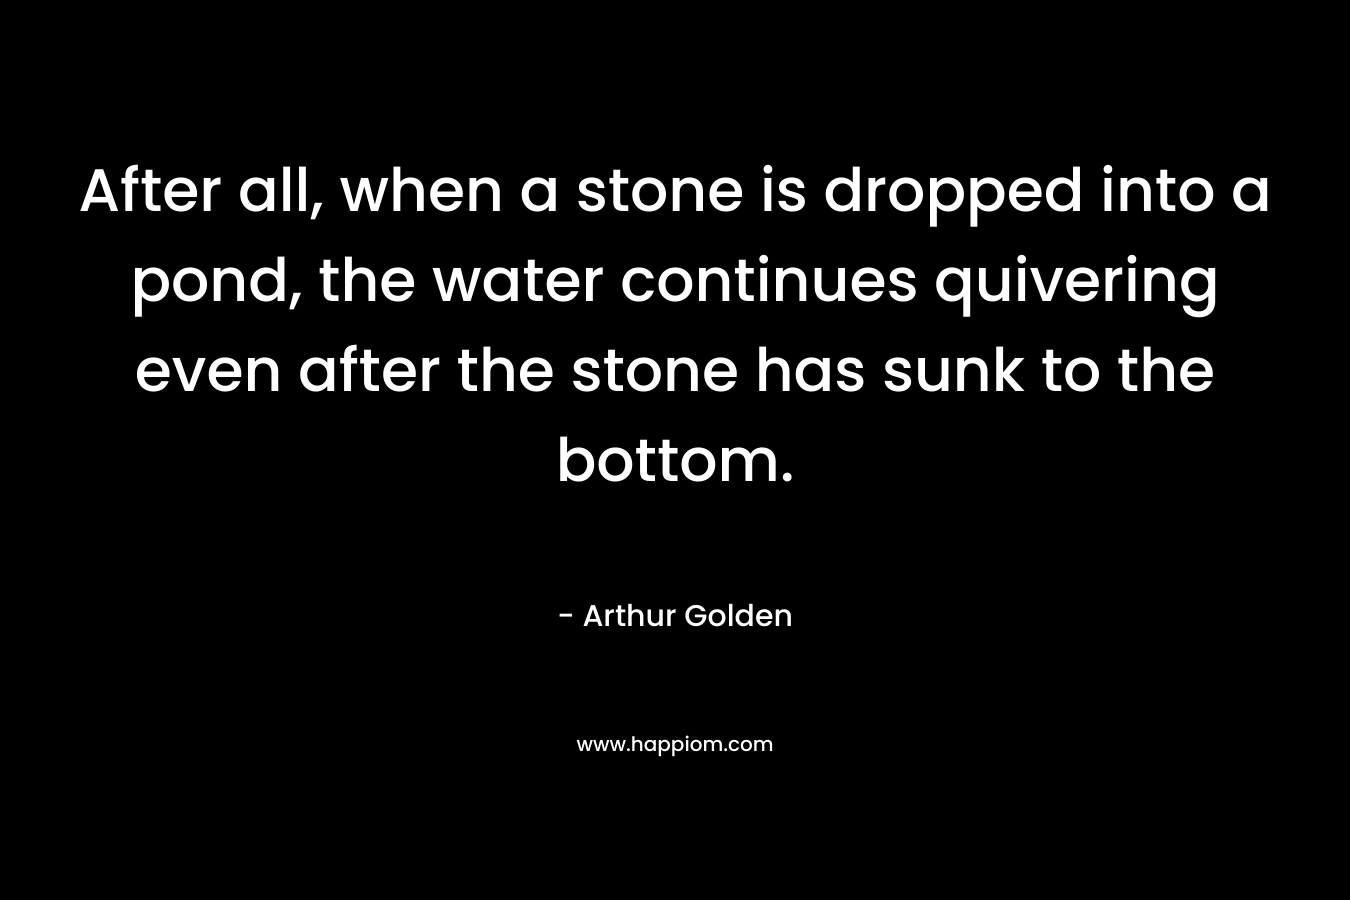 After all, when a stone is dropped into a pond, the water continues quivering even after the stone has sunk to the bottom. – Arthur Golden